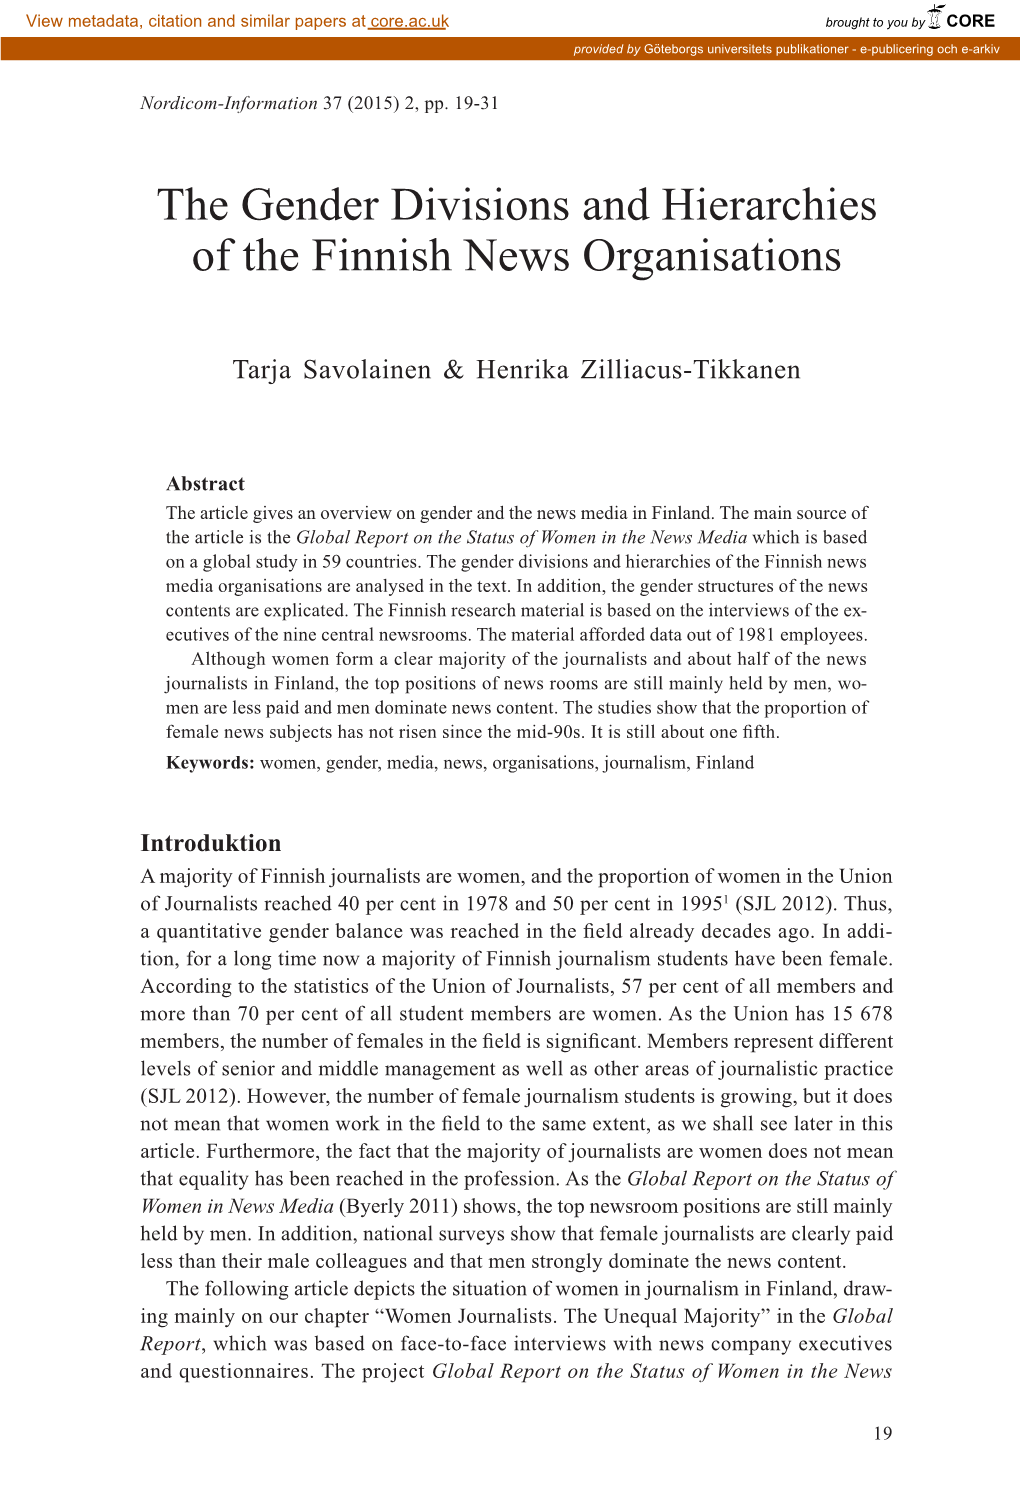 The Gender Divisions and Hierarchies of the Finnish News Organisations